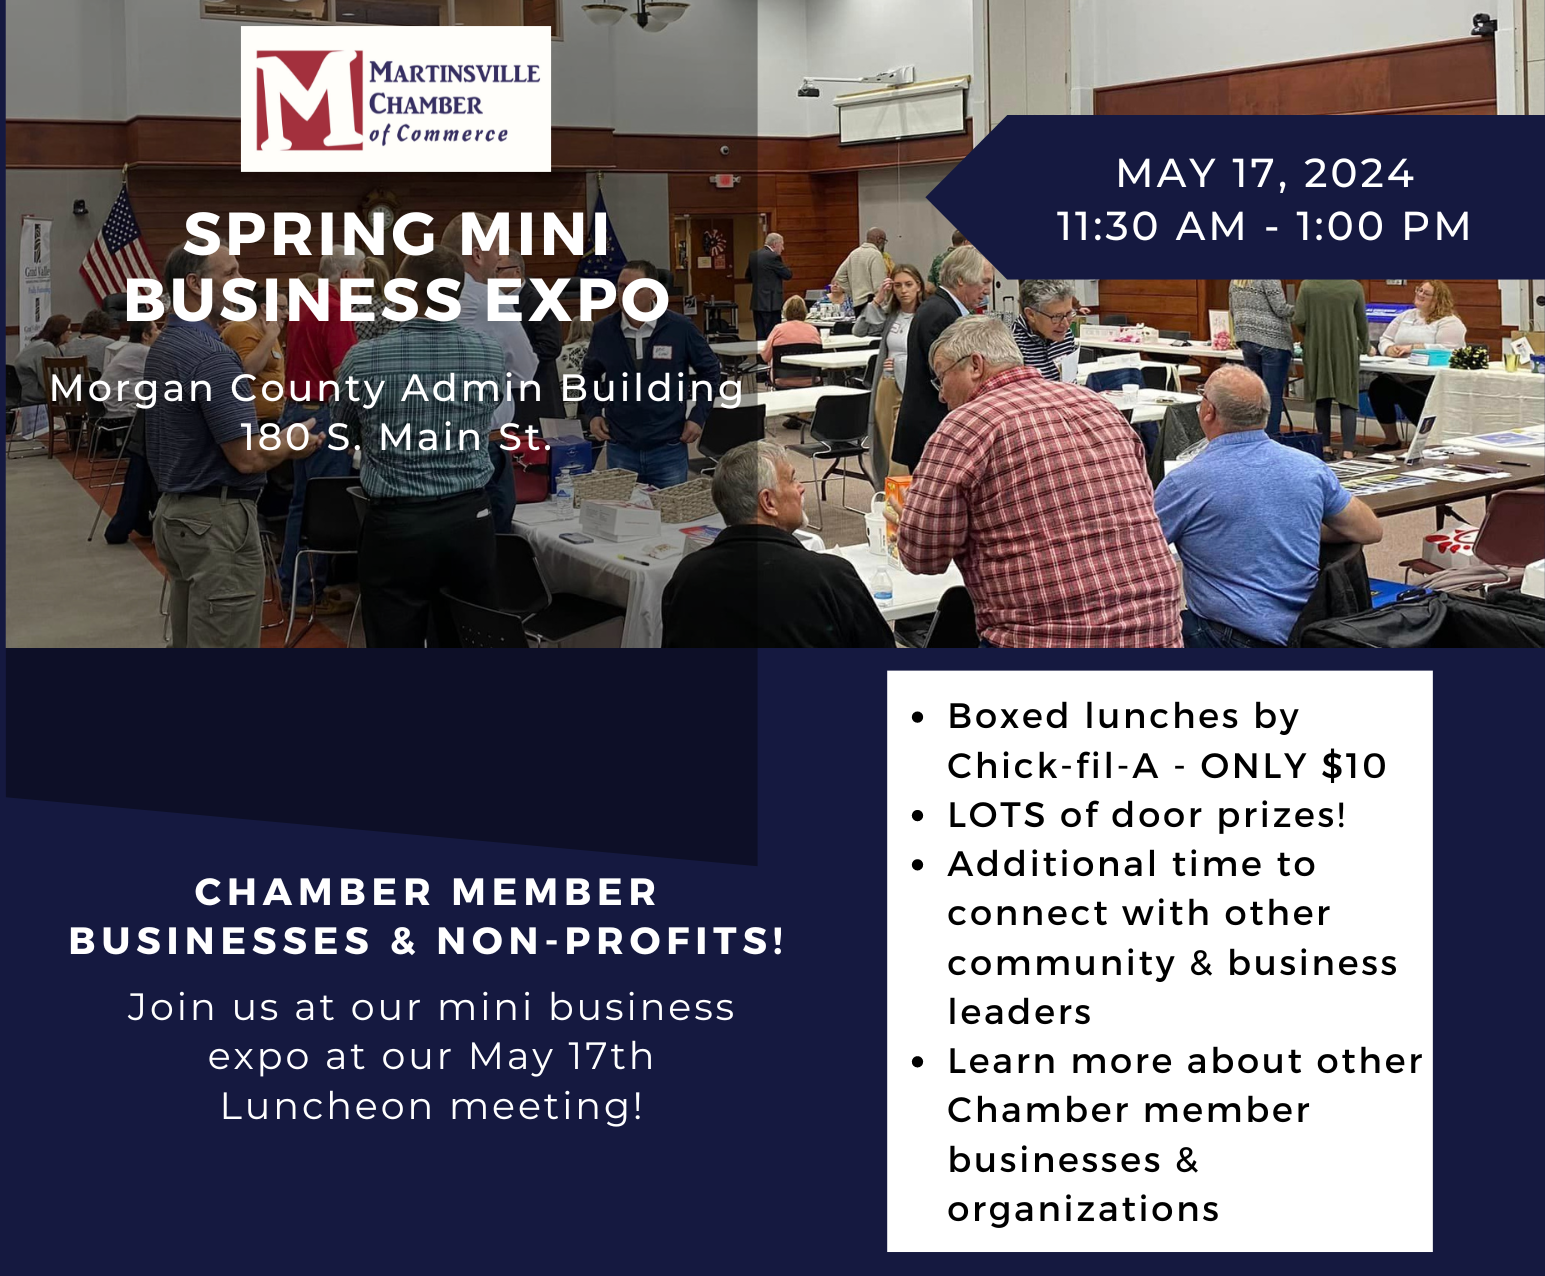 Annual Mini Business Expo will be focus of May 17th luncheon